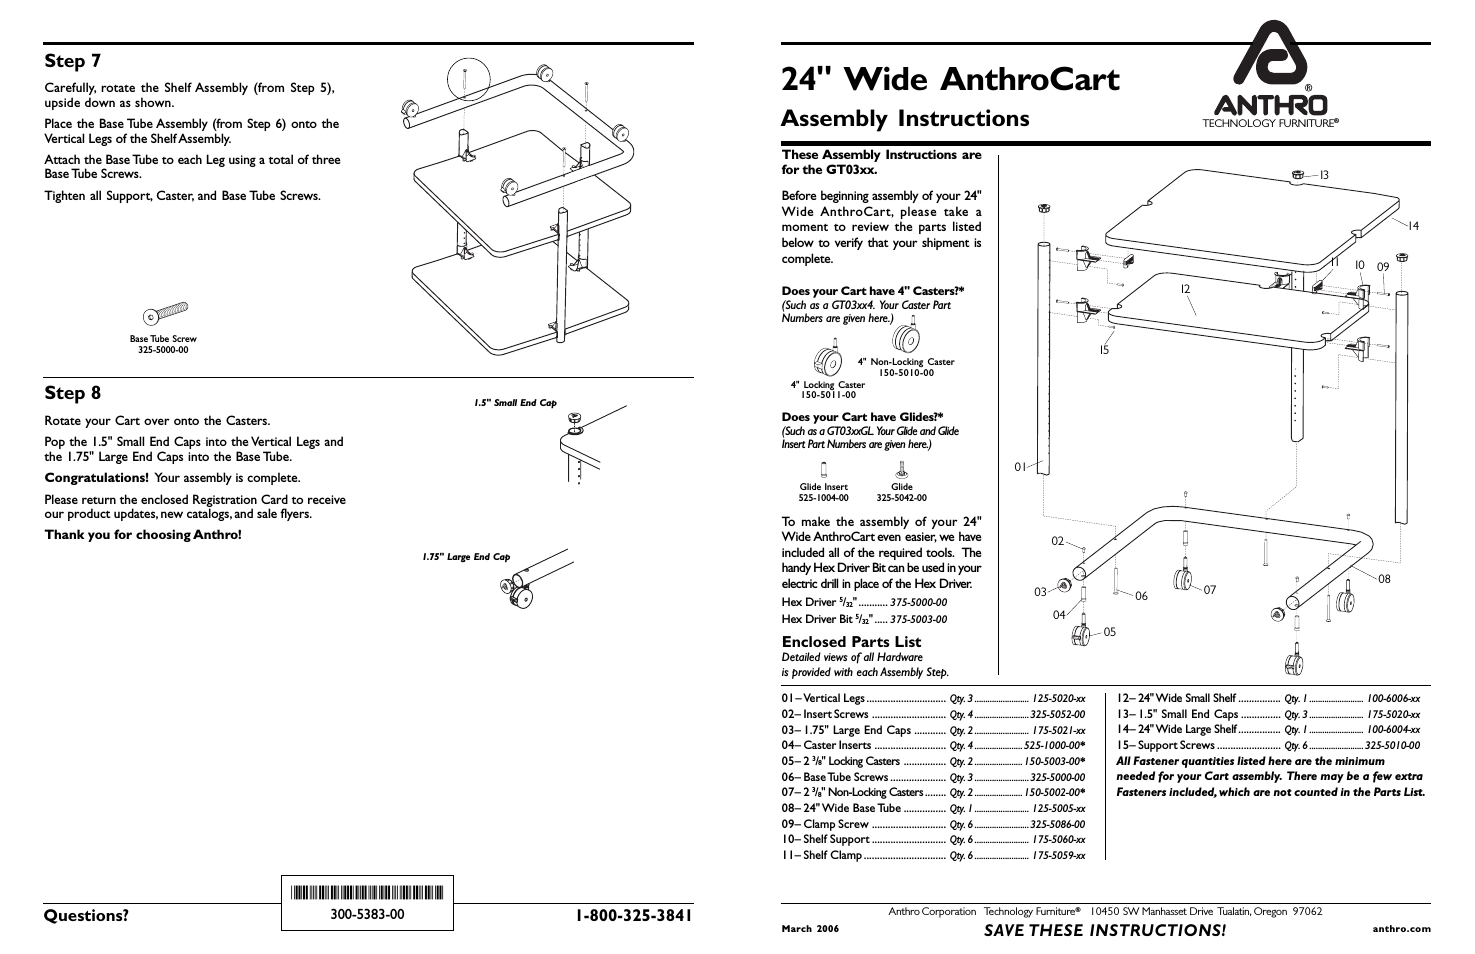 Small AnthroCarts 24W Assembly Instructions